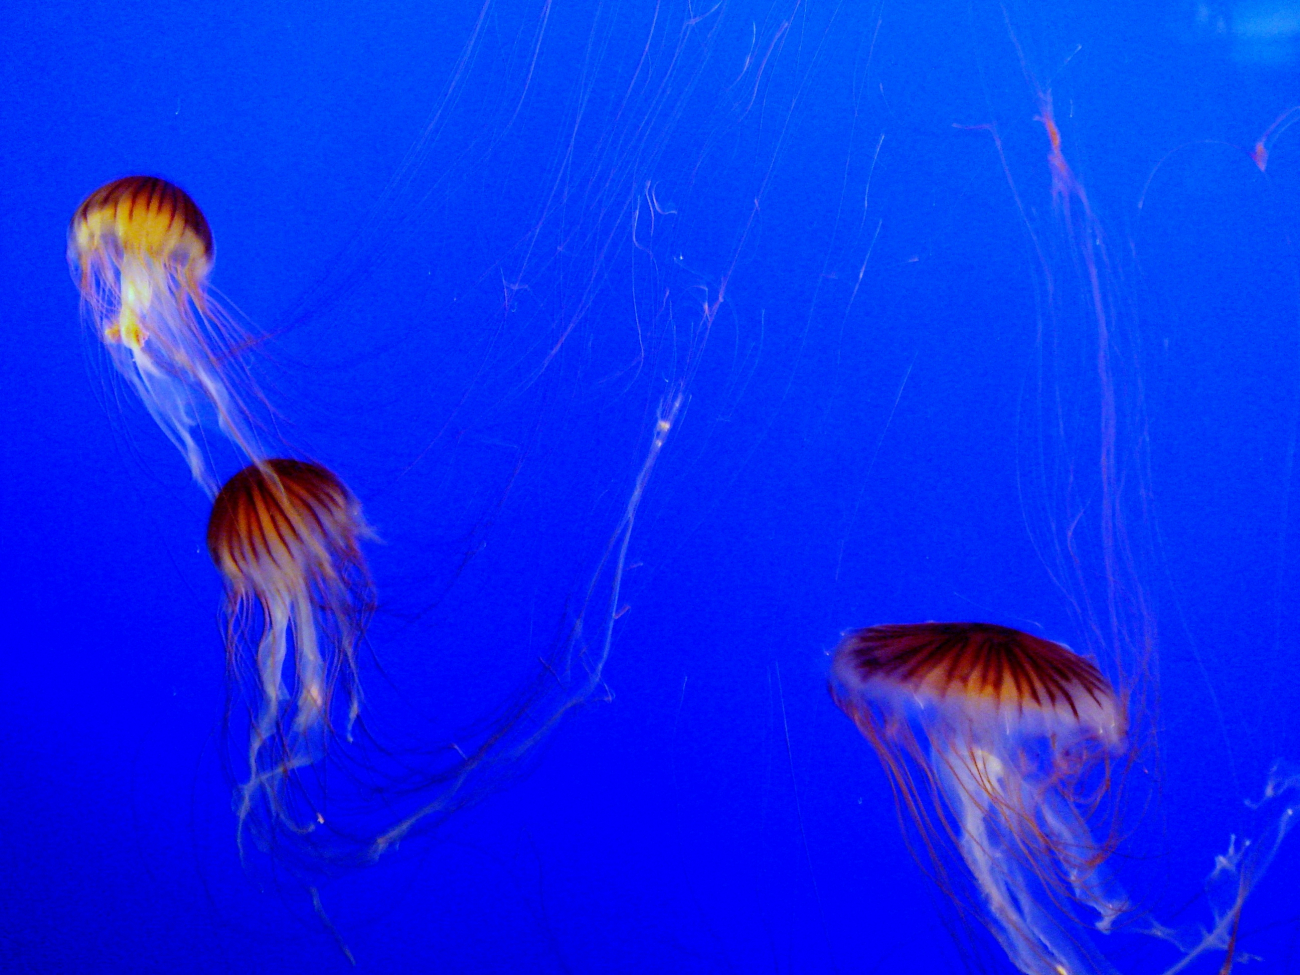 Jellyfish - explore an aquarium to see some of the wonders of the sea